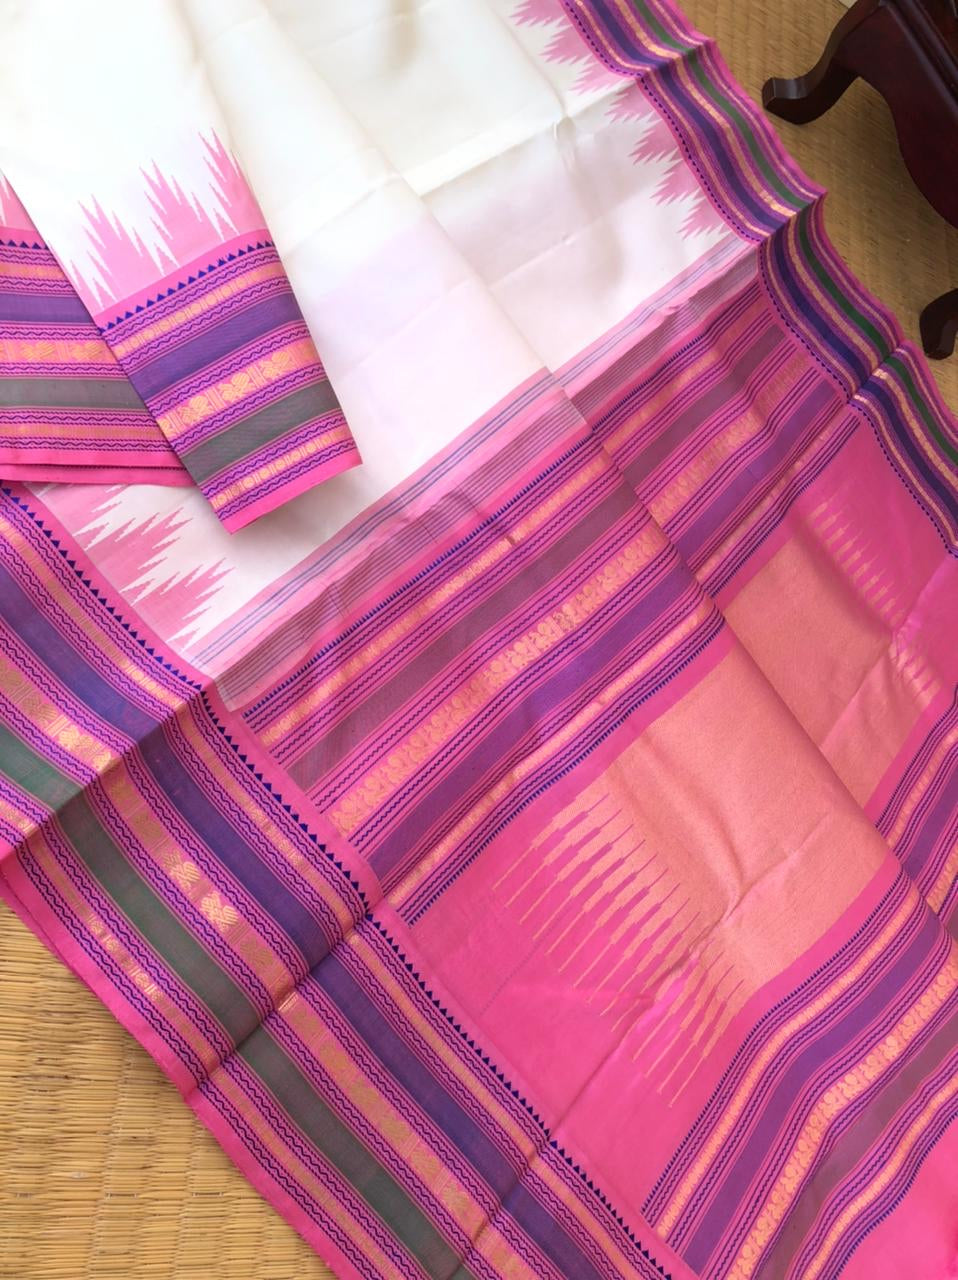 Sahasra - the smart off white and bubble pink korvai Kanchivaram with zari and silk thread woven borders and pallu